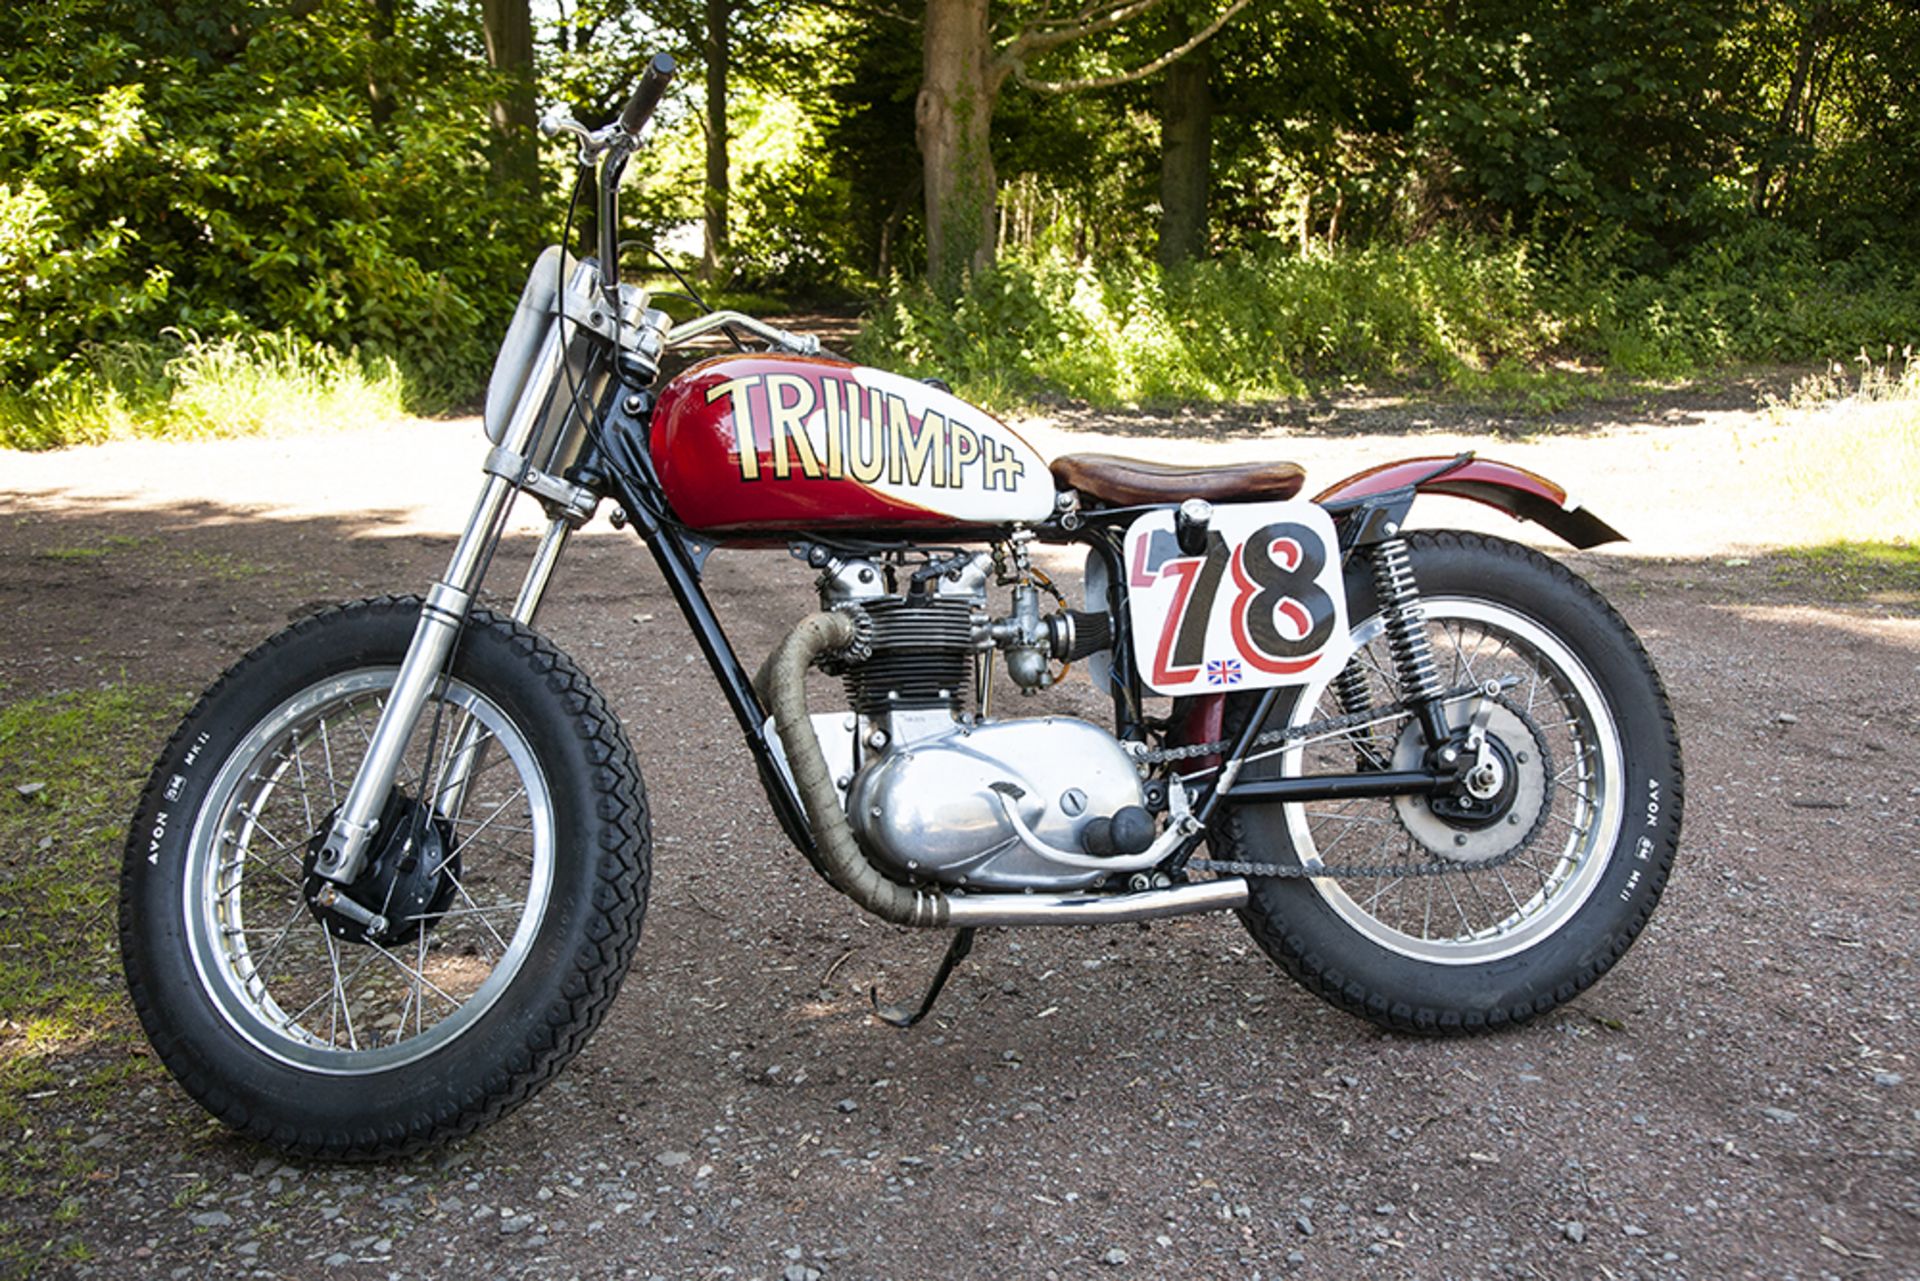 1964 Triumph 3TA speed twin motorcycle - Image 9 of 10